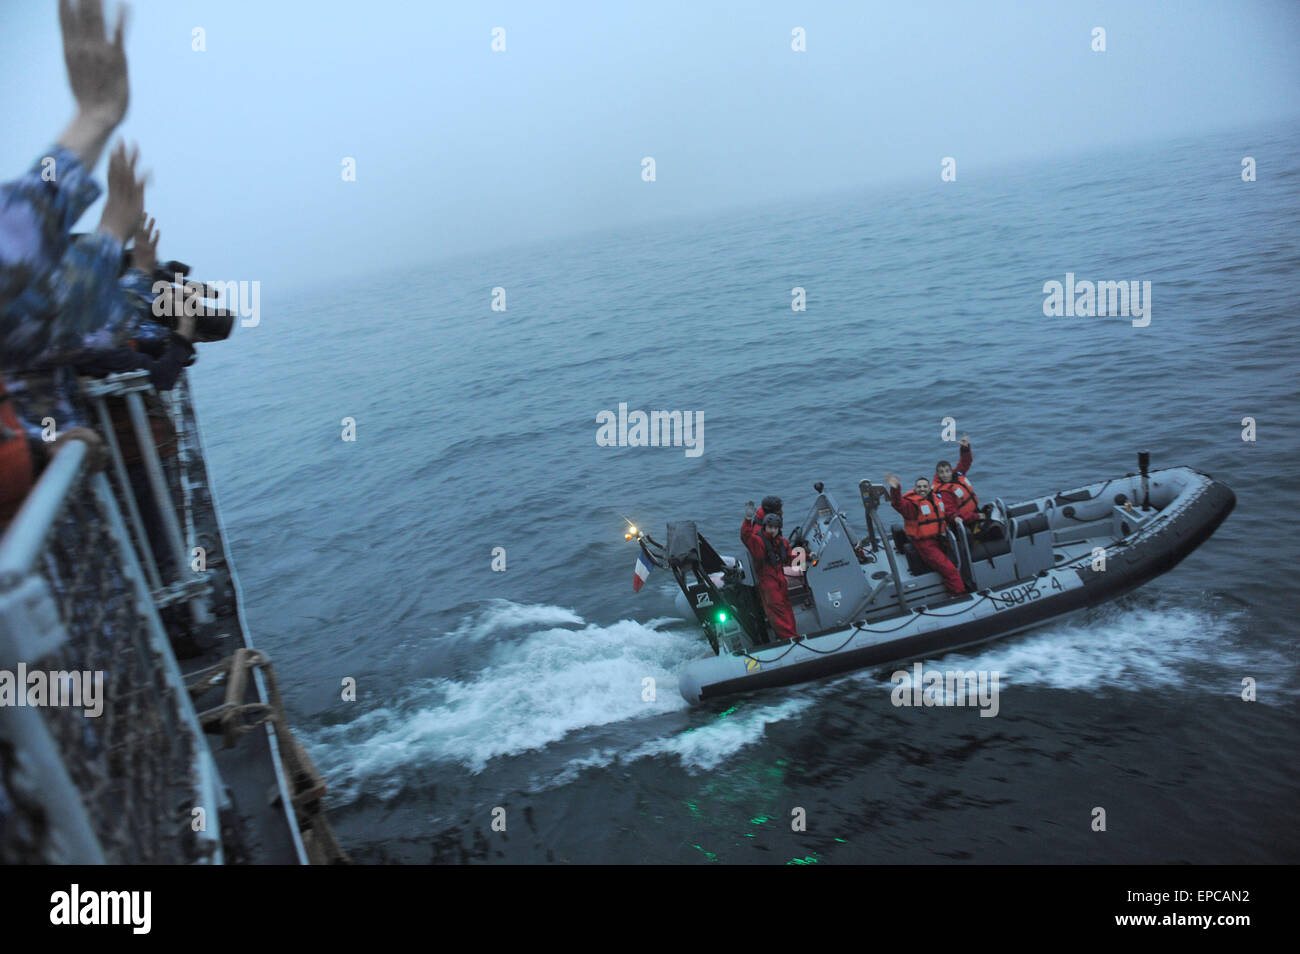 (150516) -- SHANGHAI, May 16, 2015 (Xinhua) -- A craft from French warship Dixmude is seen during a joint naval drill with Chinese navy in the East China Sea, May 15, 2015. A French naval fleet consisted of  the Mistral-class projection and command (BPC) ship Dixmude and the frigate Aconit took part in a joint naval drill with Zhoushan warship of Chinese navy in the East China Sea on Friday.  (Xinhua/Jiang Shan) (wyo) Stock Photo